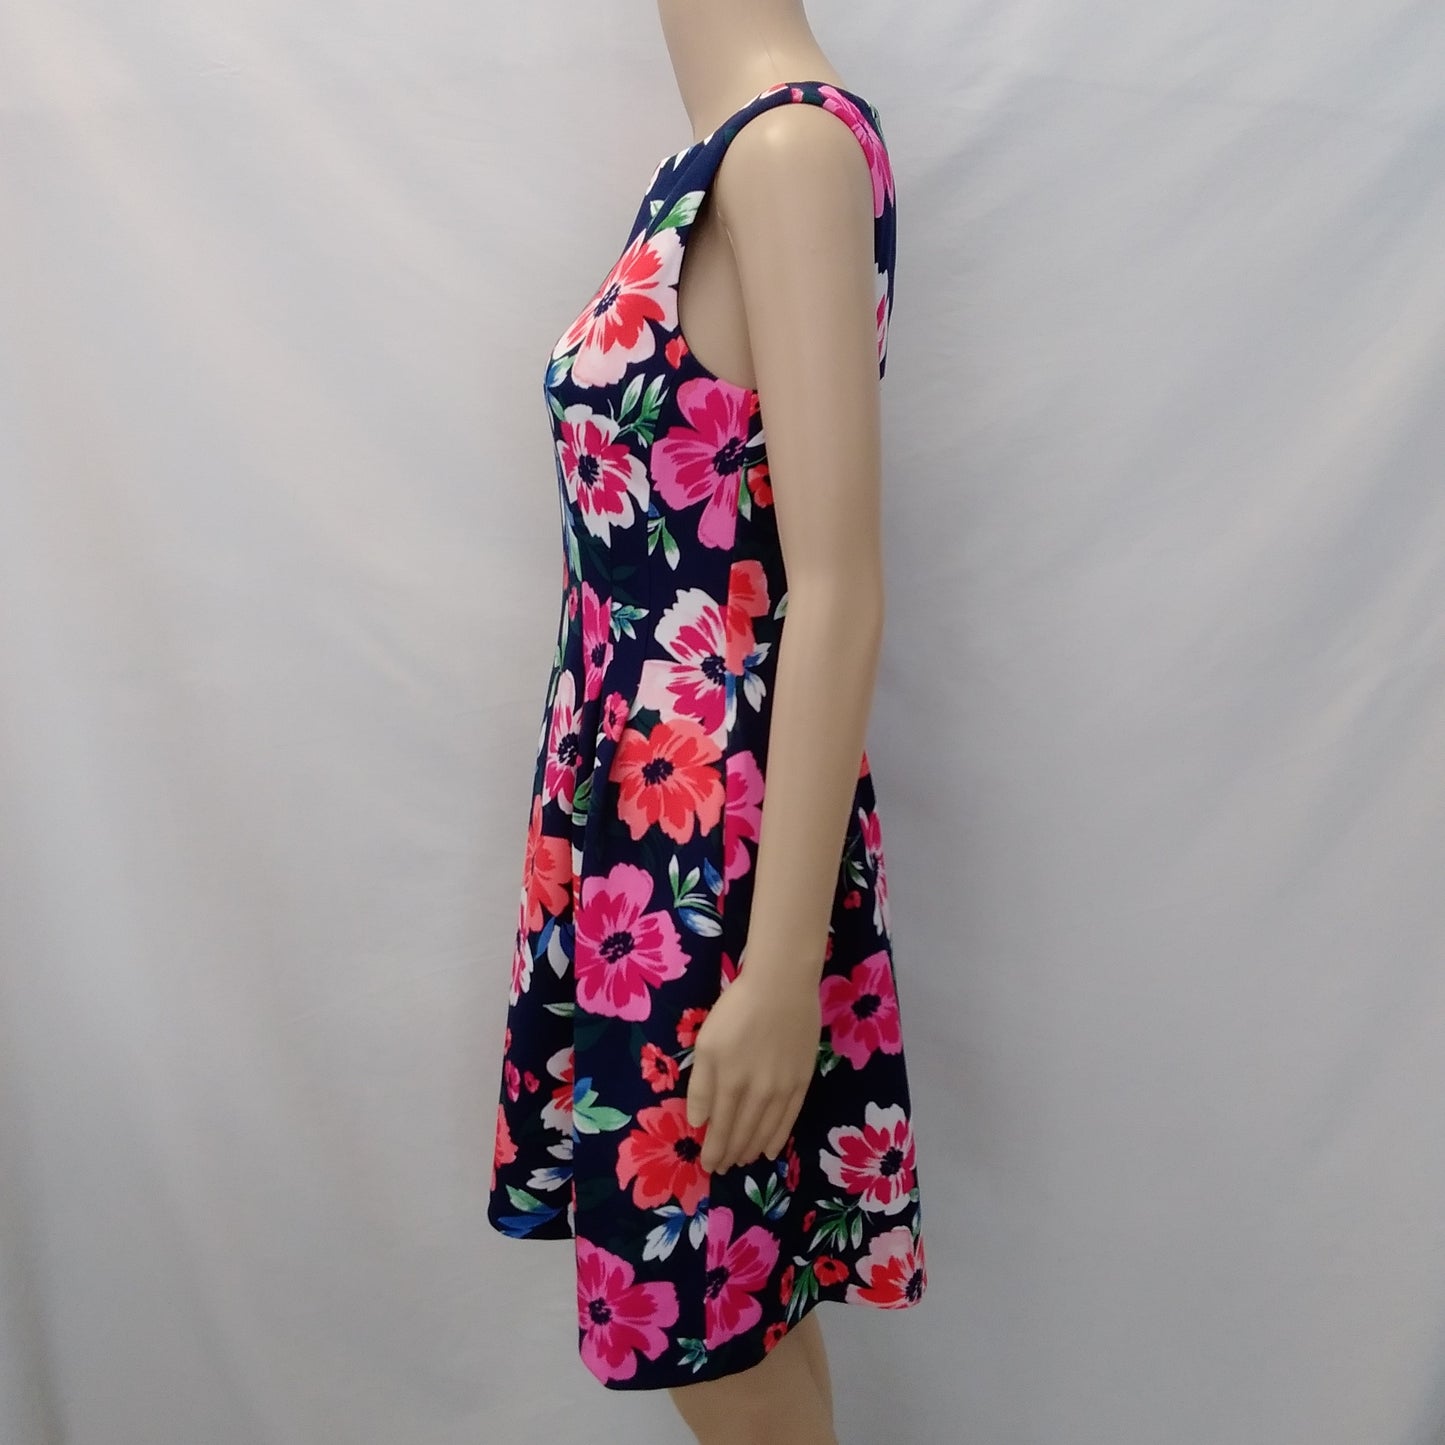 VINCE CAMUTO navy pink floral Sleeveless Dress - 4